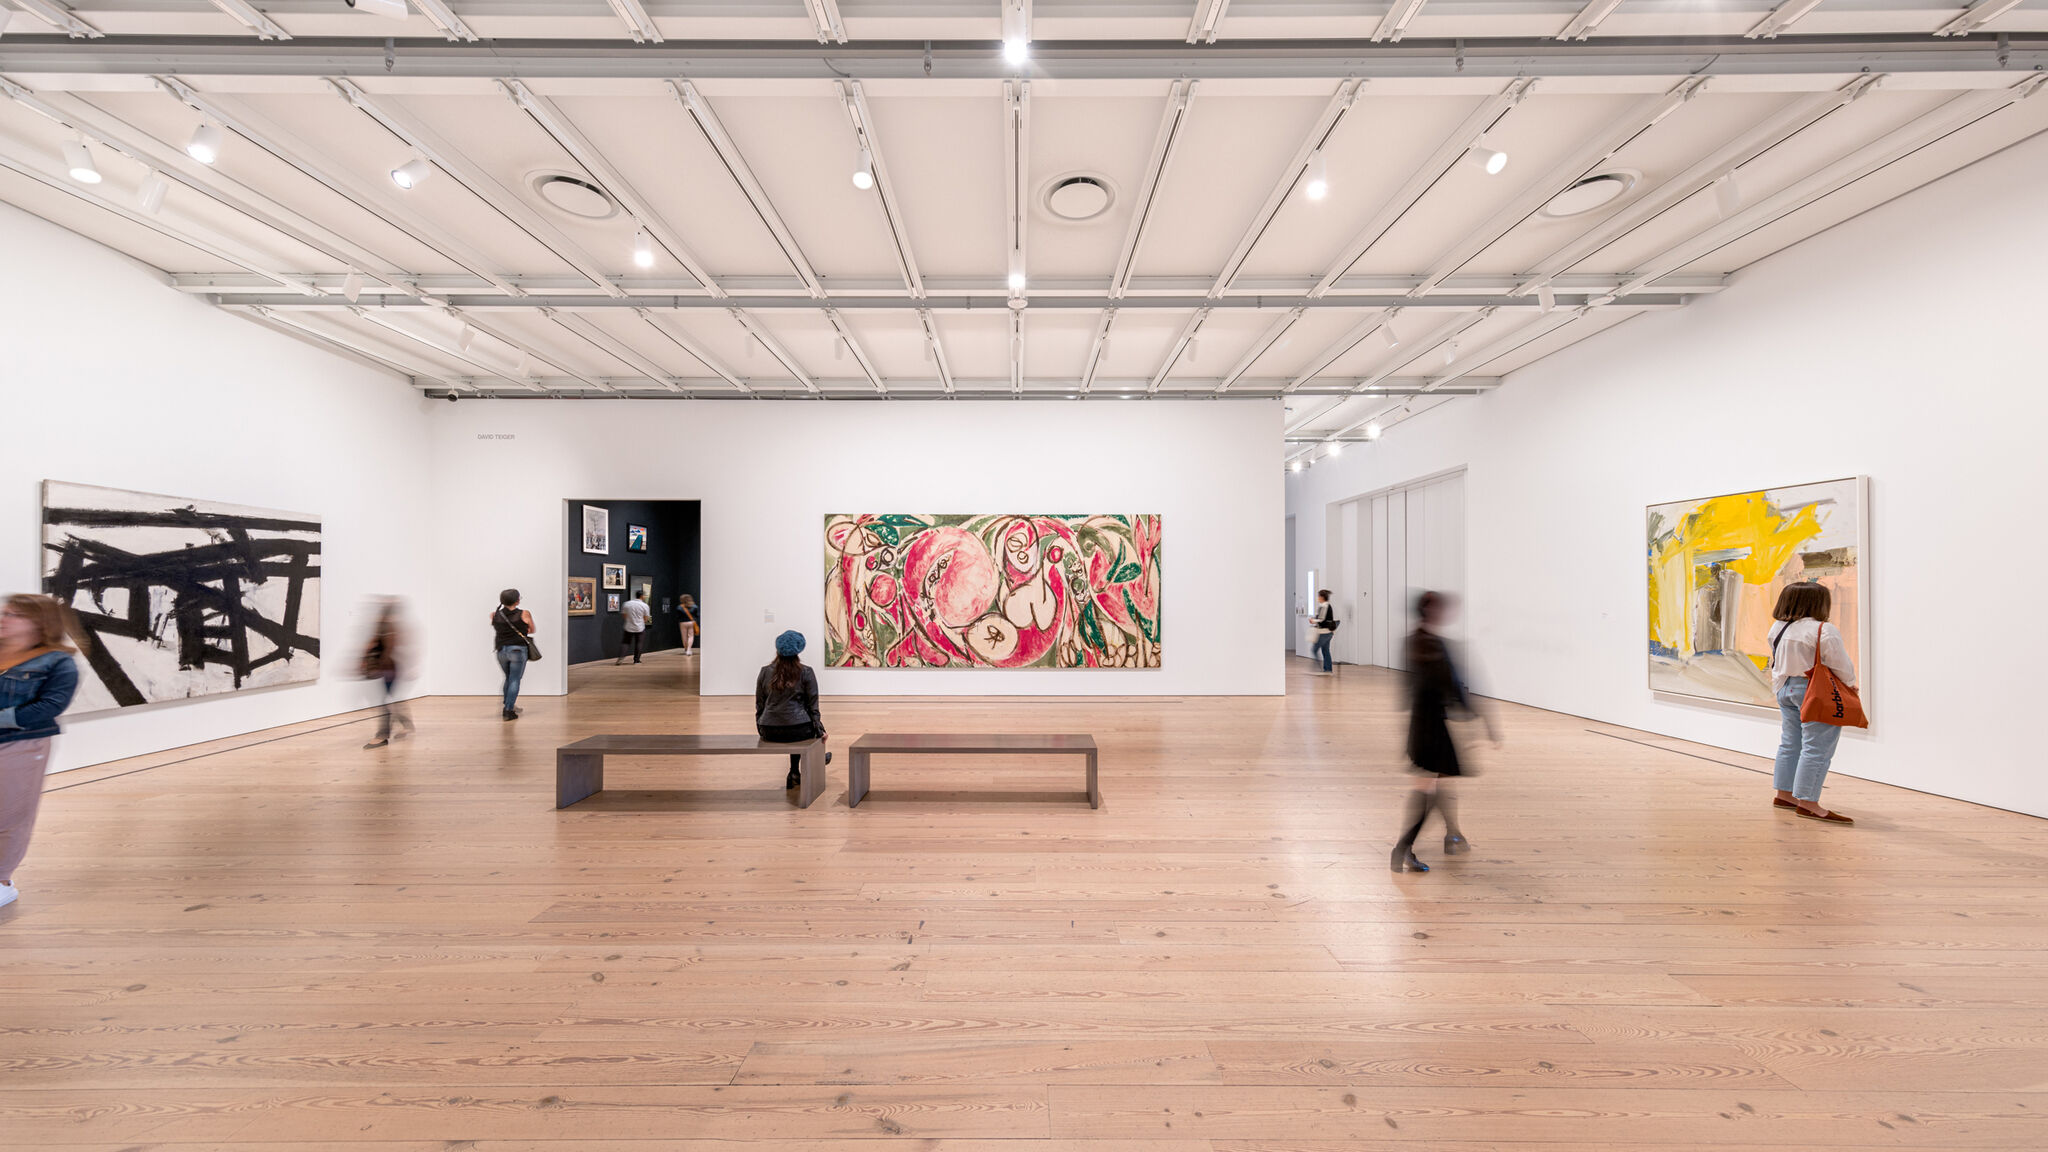 A large gallery with art on the walls. A large painting of organic pink and green shapes is at the center. 